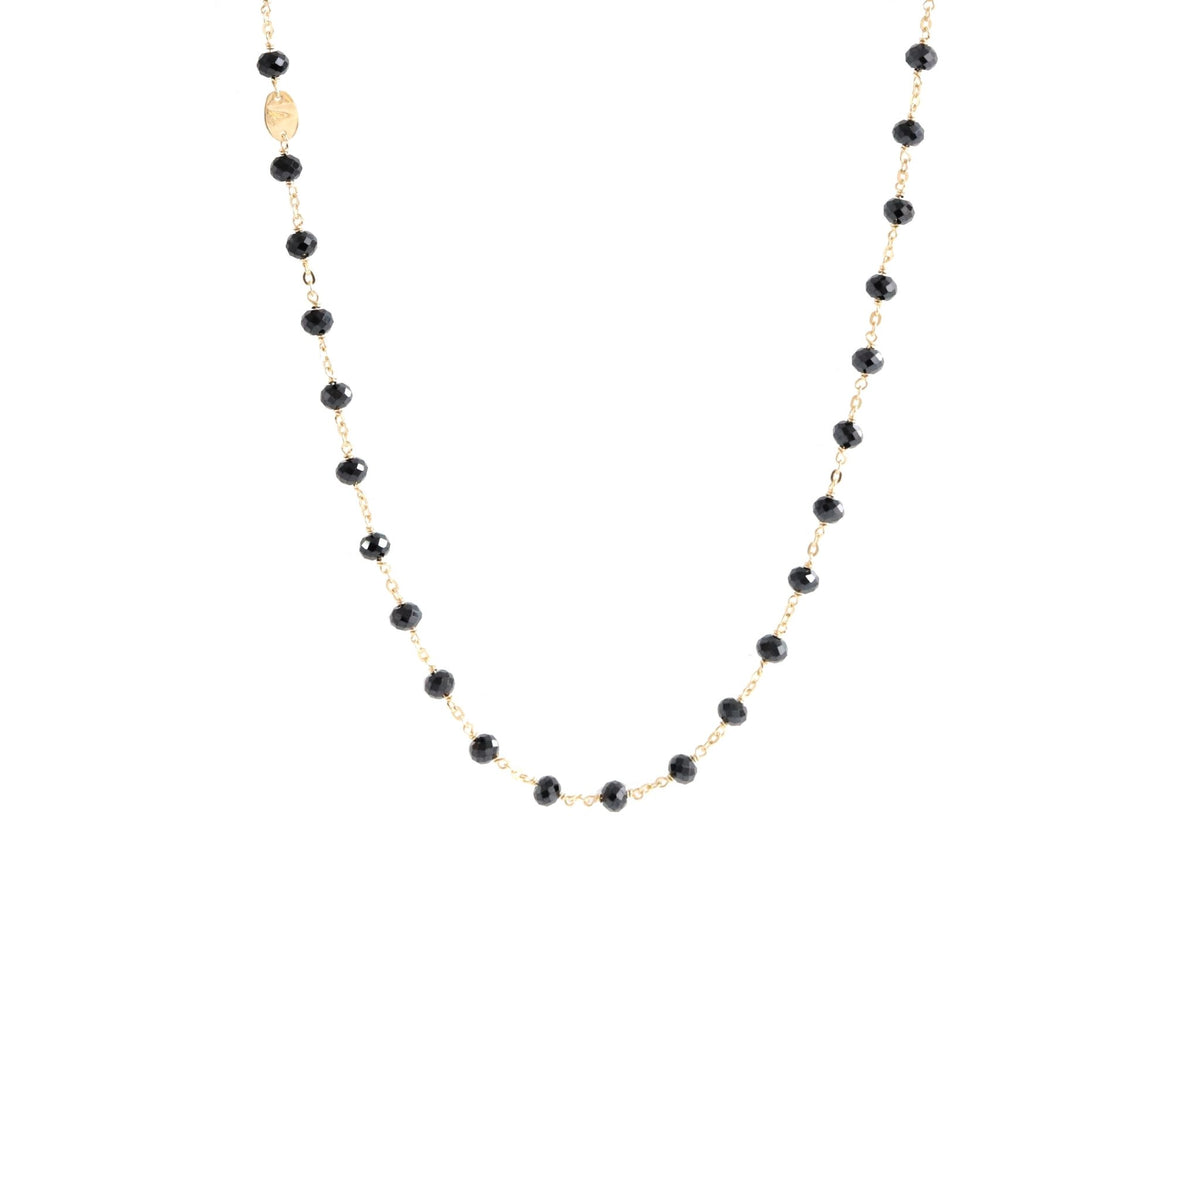 ICONIC MIDI BEADED NECKLACE - BLACK ONYX &amp; GOLD 24-25&quot; - SO PRETTY CARA COTTER